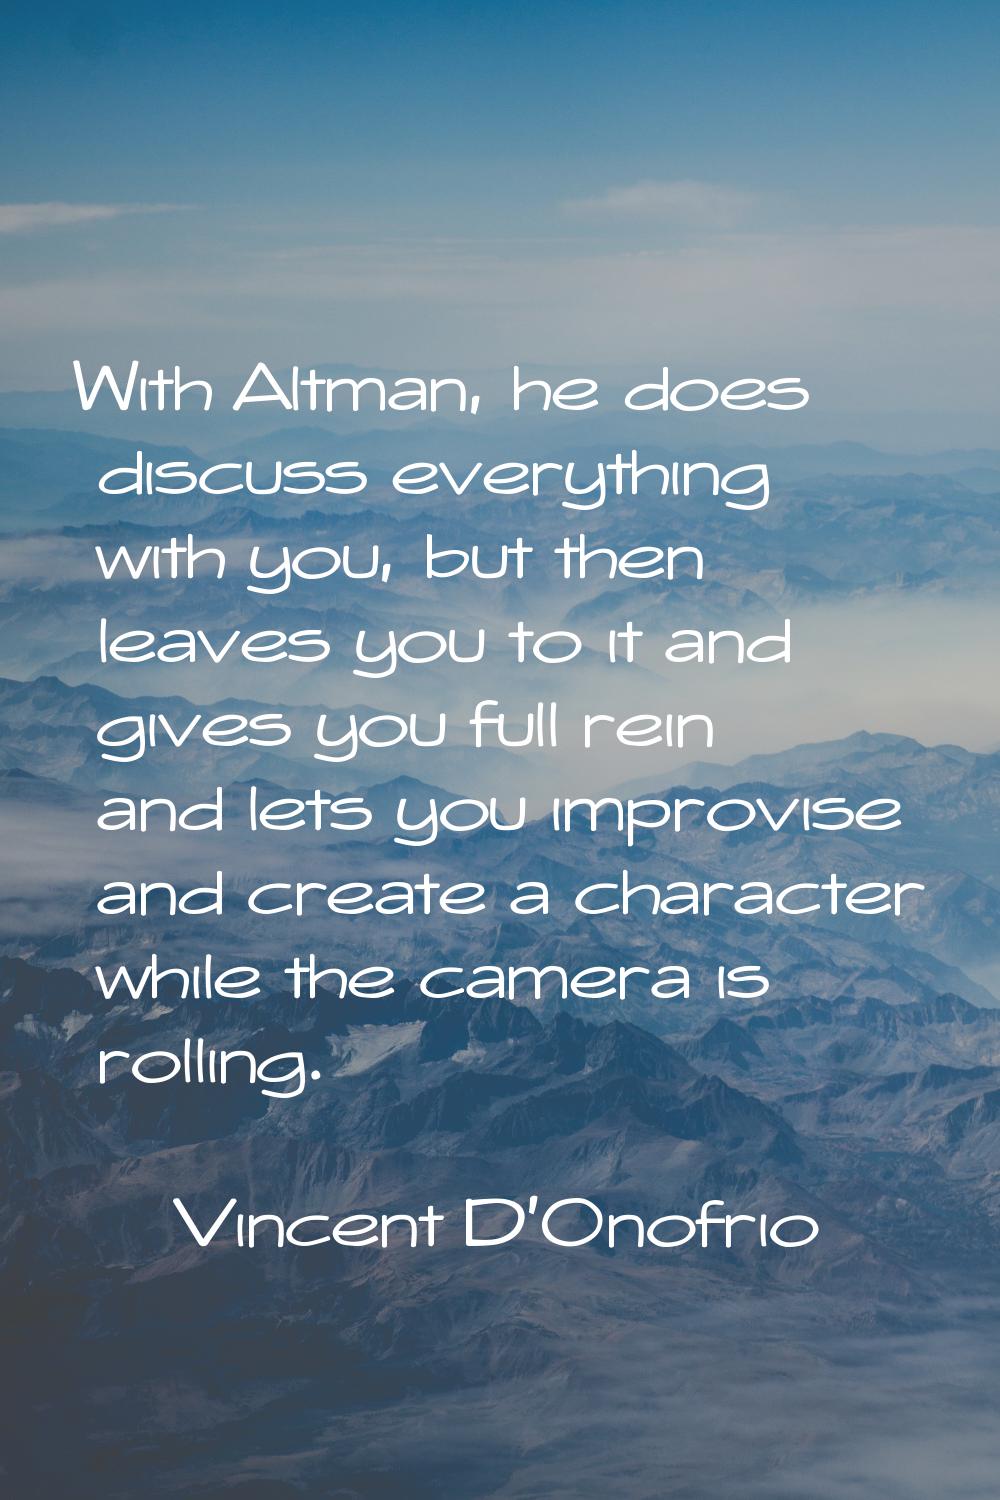 With Altman, he does discuss everything with you, but then leaves you to it and gives you full rein